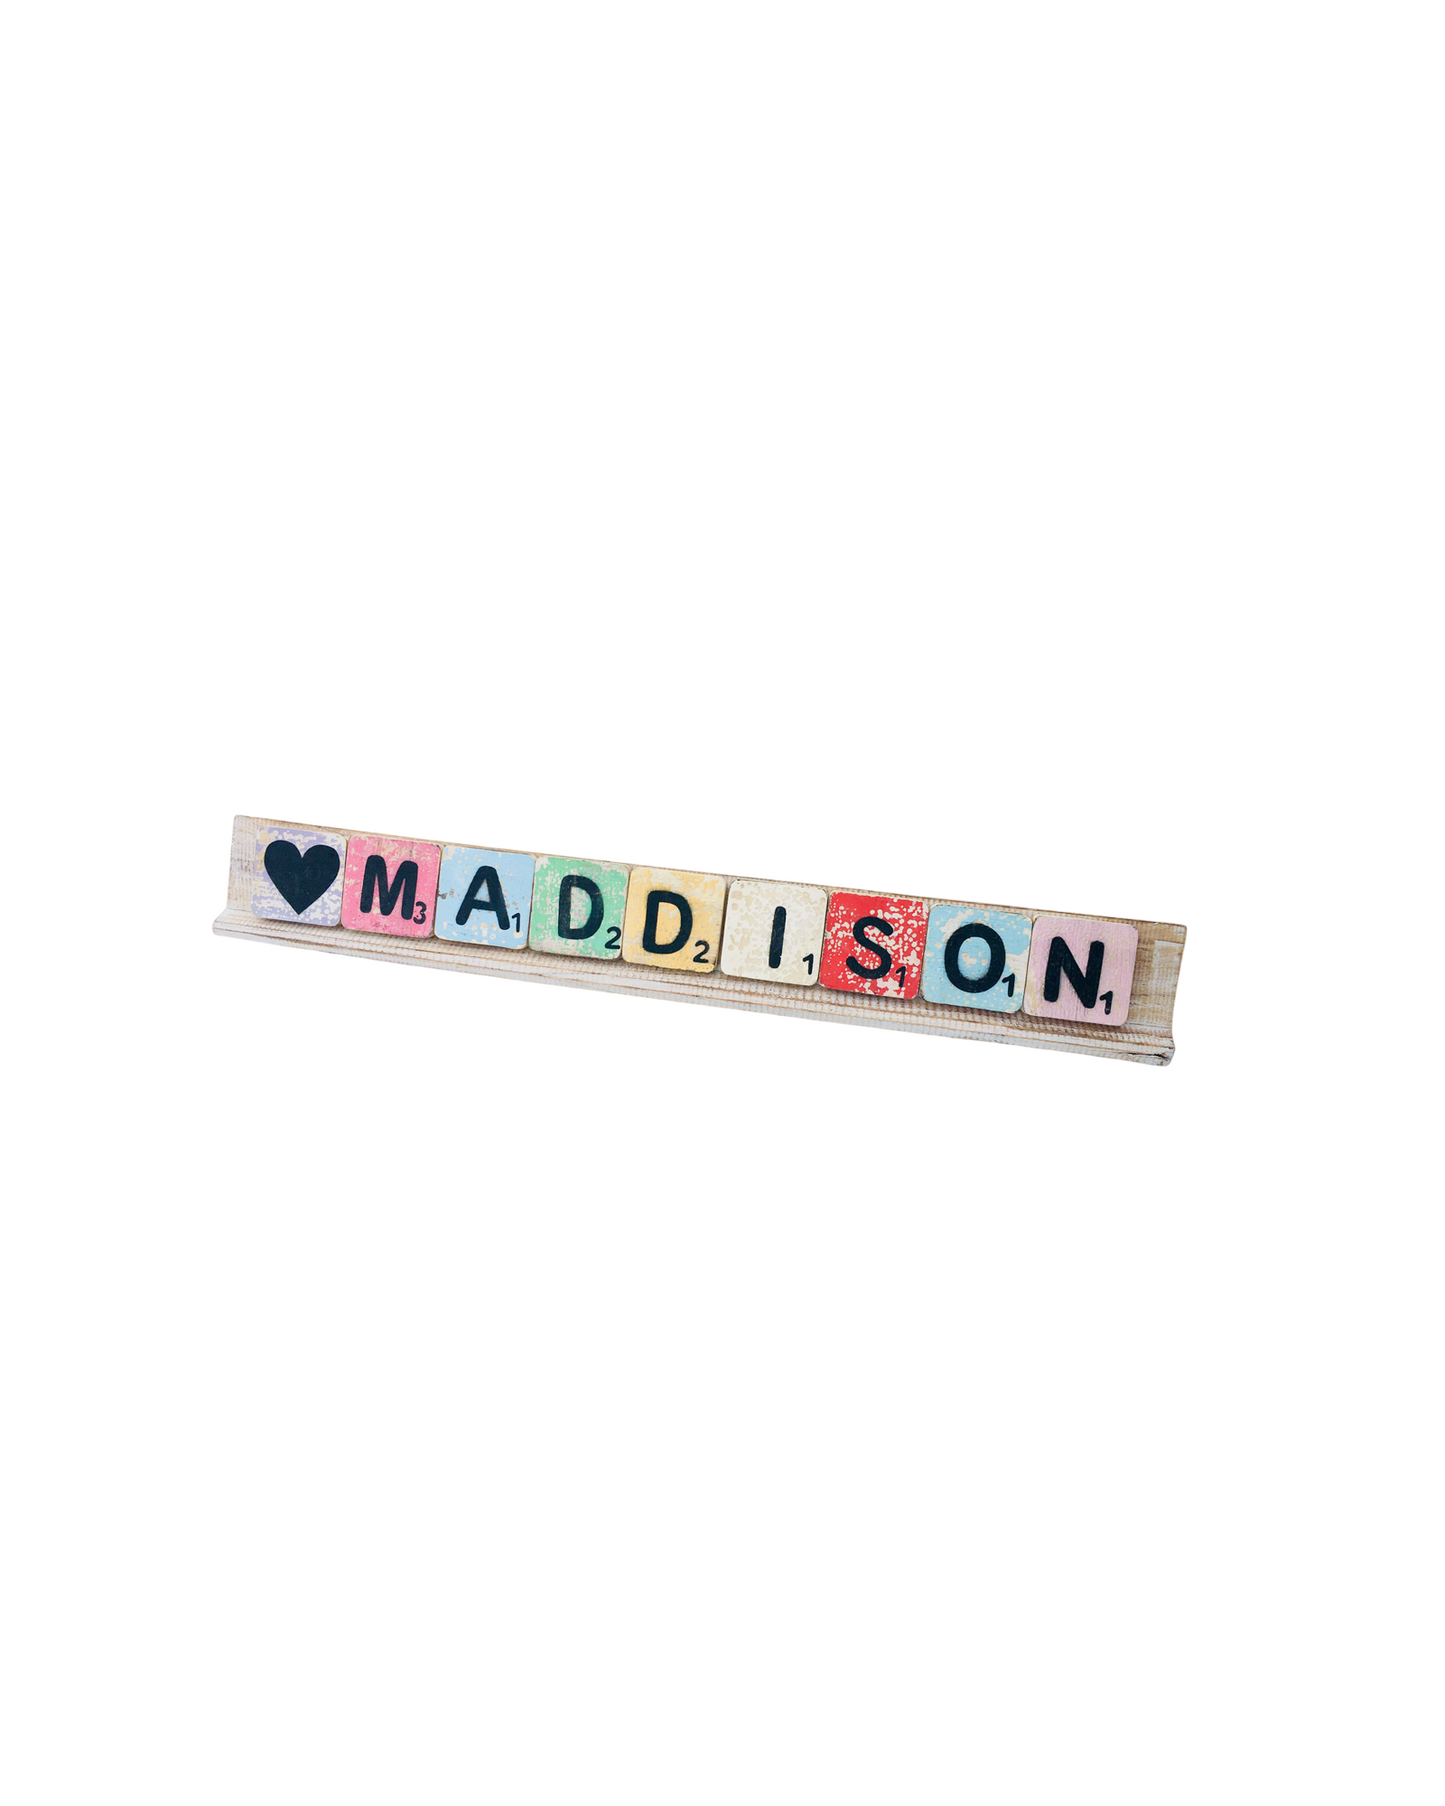 Wooden Letters & Magnets